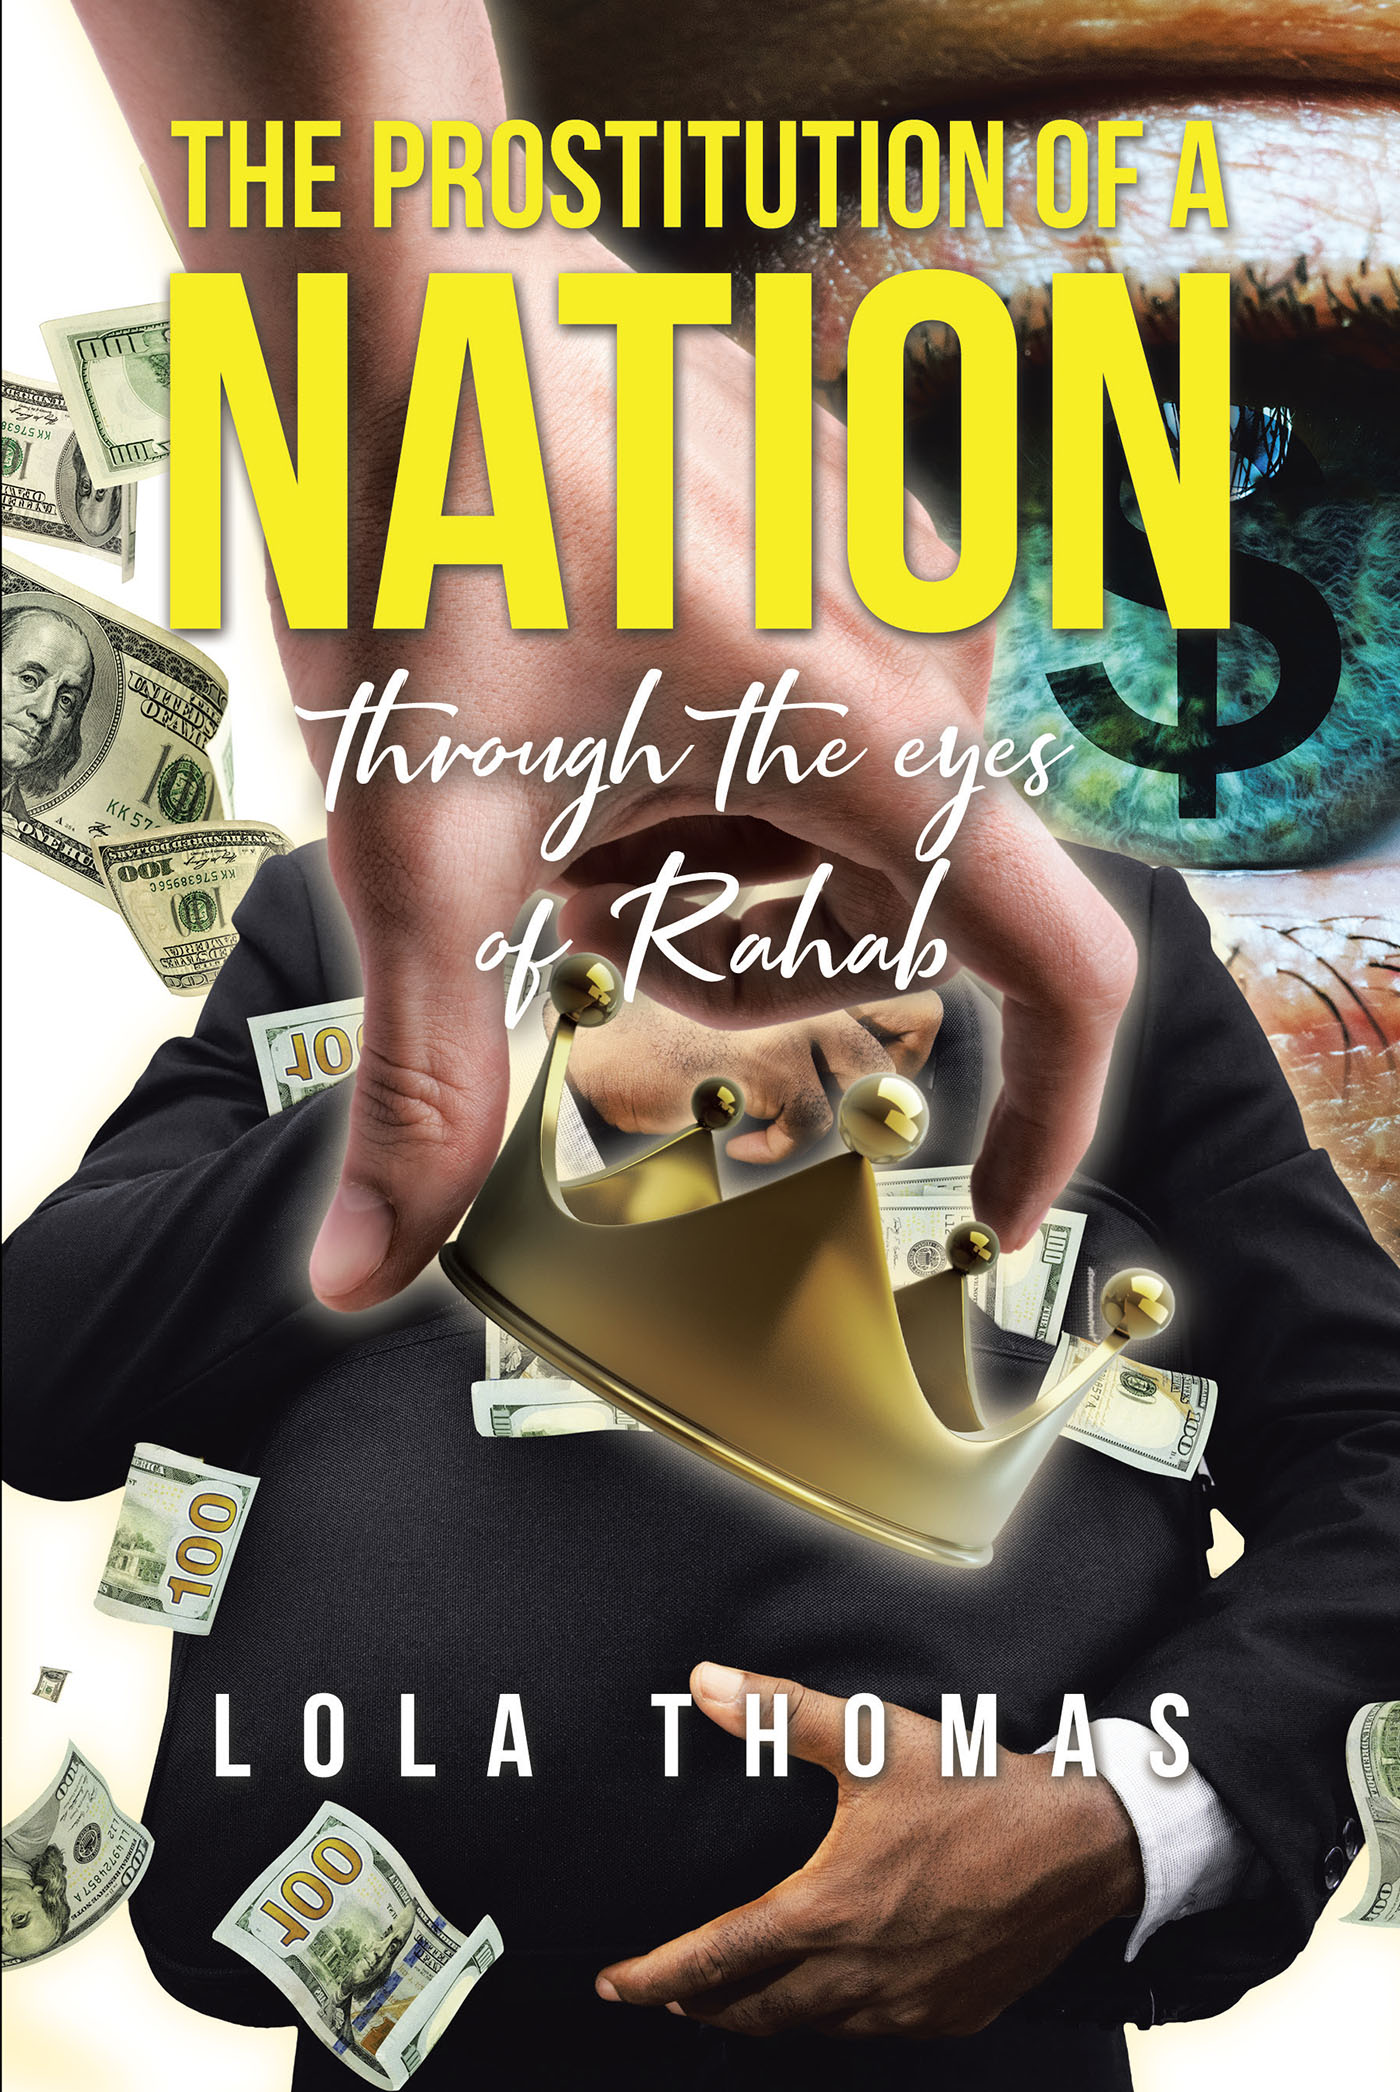 Author Lola Thomas’s New Book, "The Prostitution of a Nation Through the Eyes of Rahab," Explores the Similarities Between the Story of Rahab and Modern Society